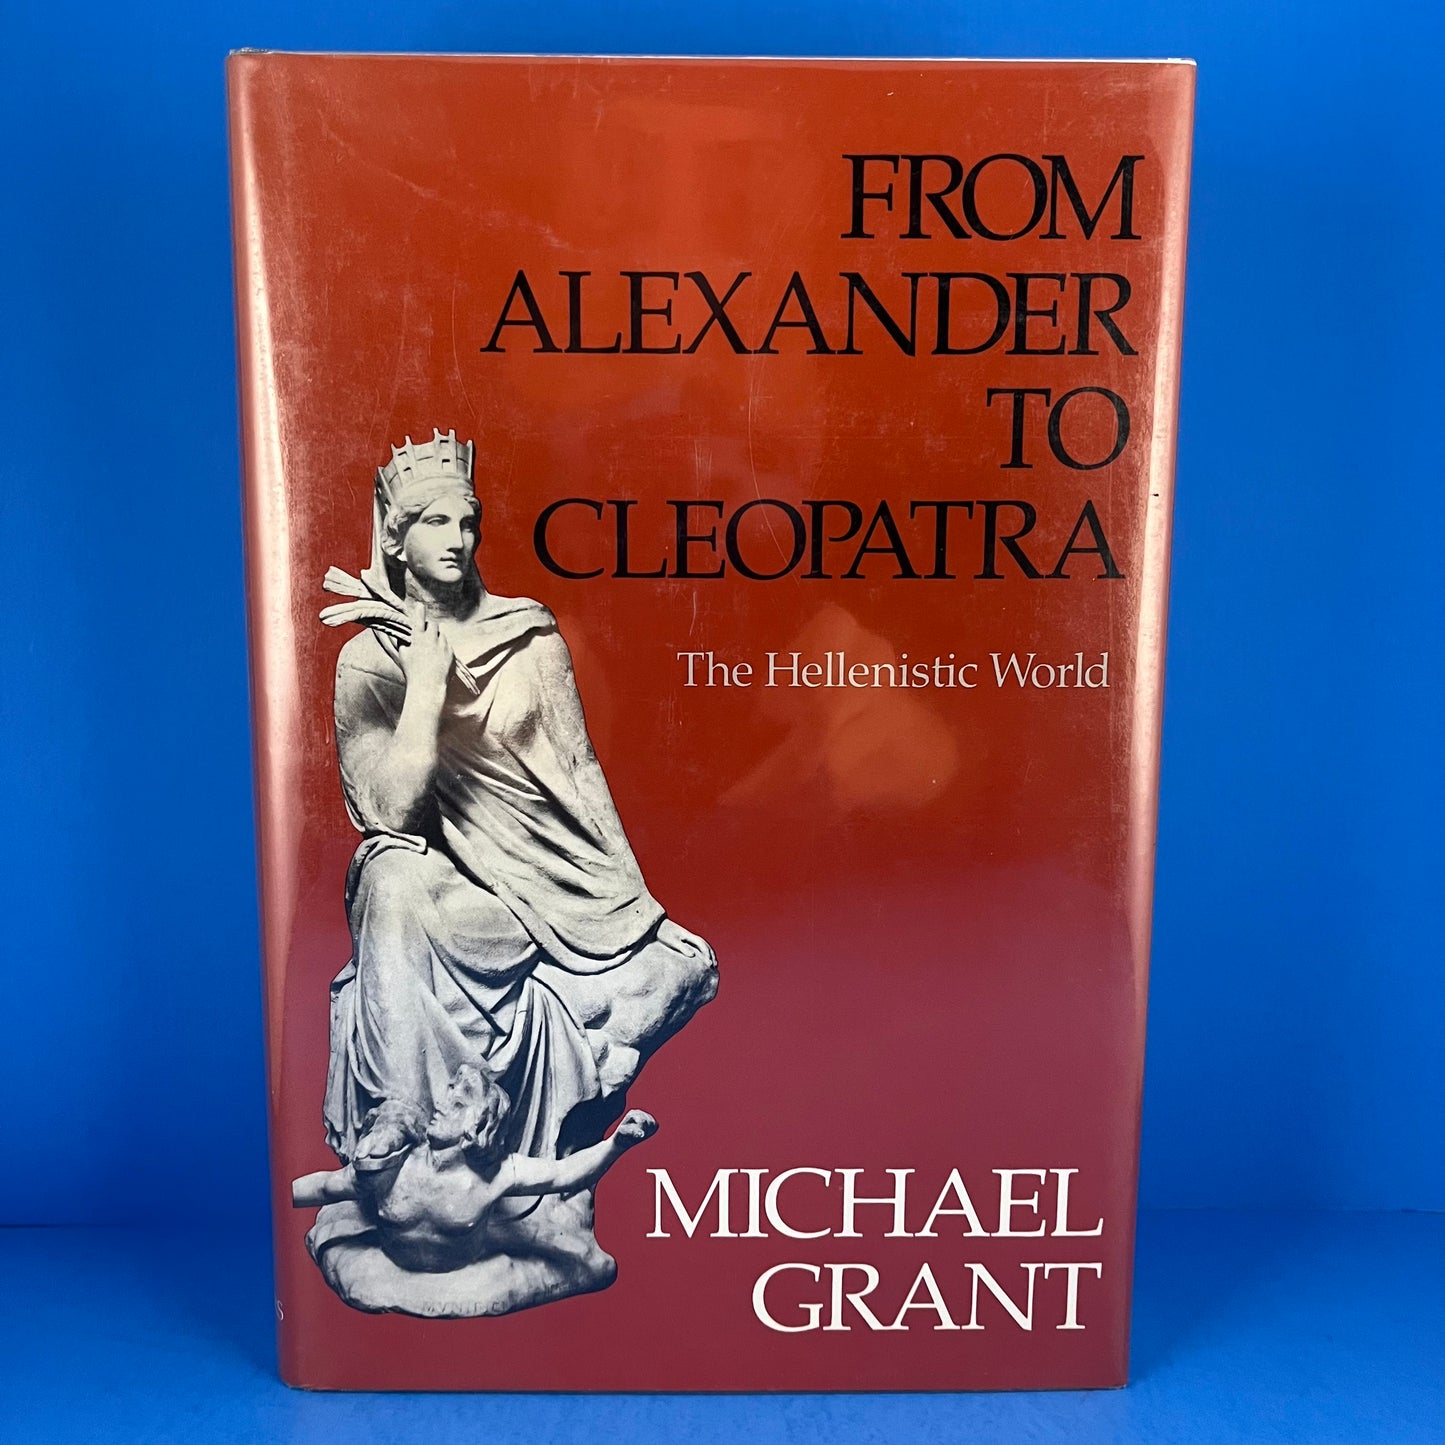 From Alexander to Cleopatra